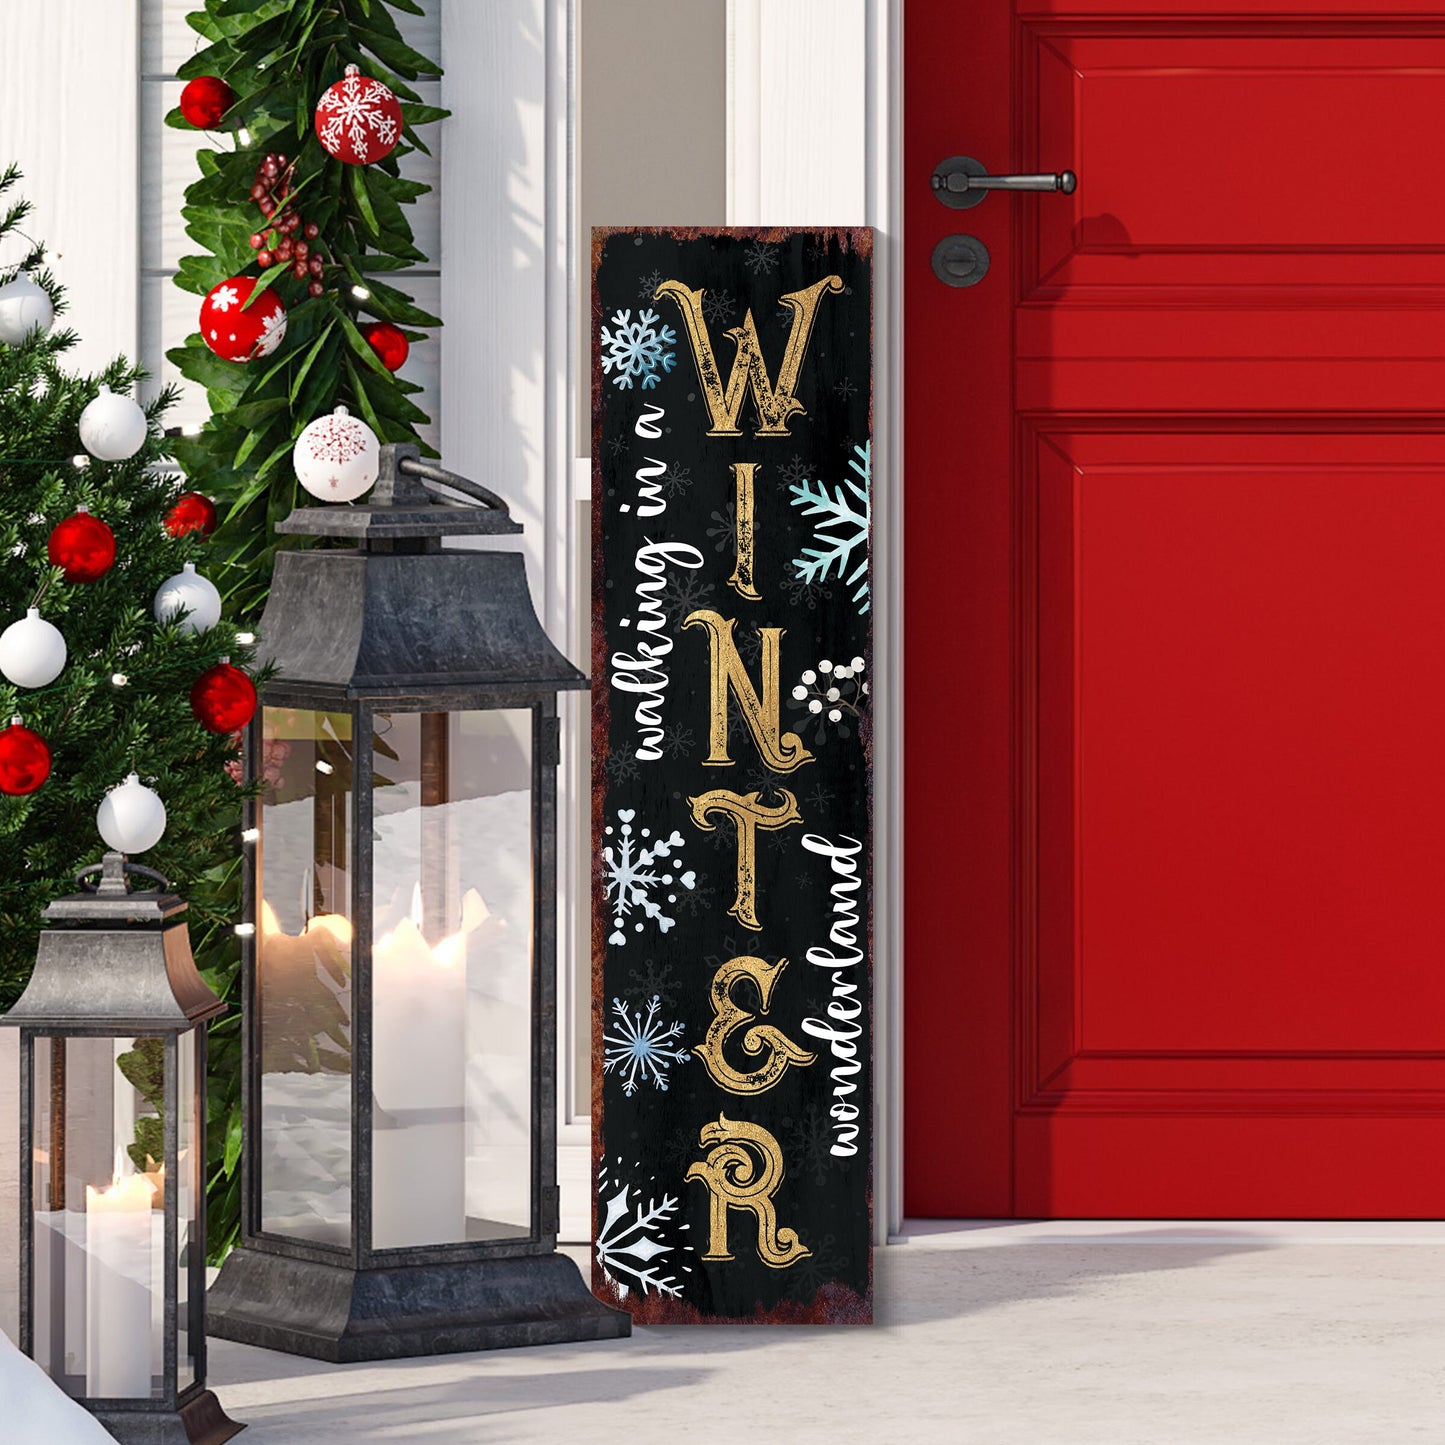 36in "Walking in a Winter Wonderland" Christmas Porch Sign - Front Porch Christmas Welcome Sign, Rustic Modern Farmhouse Entryway Board